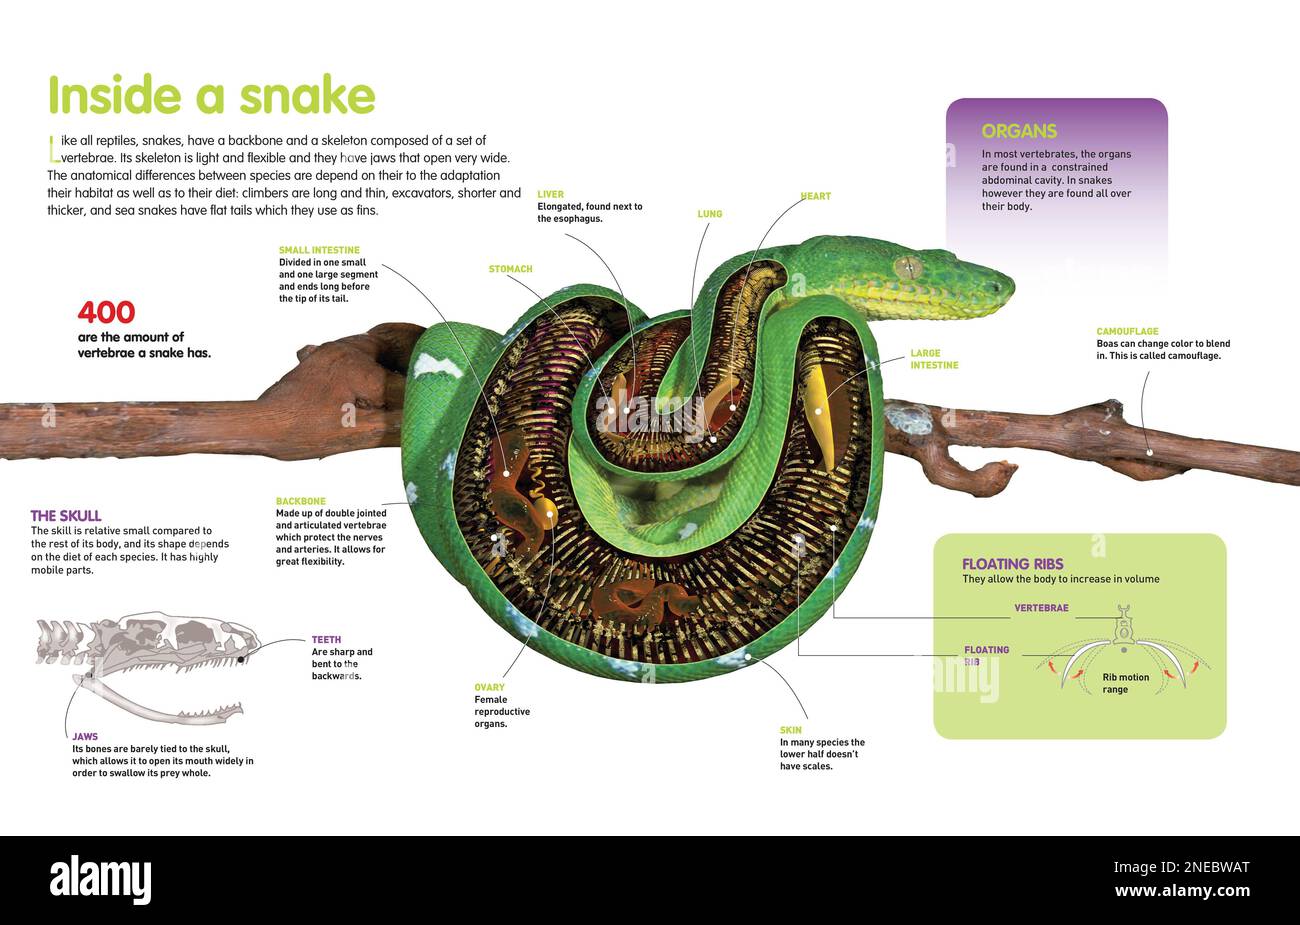 Infographic about the anatomy of snakes. [QuarkXPress (.qxp); Adobe InDesign (.indd); 4960x3188]. Stock Photo